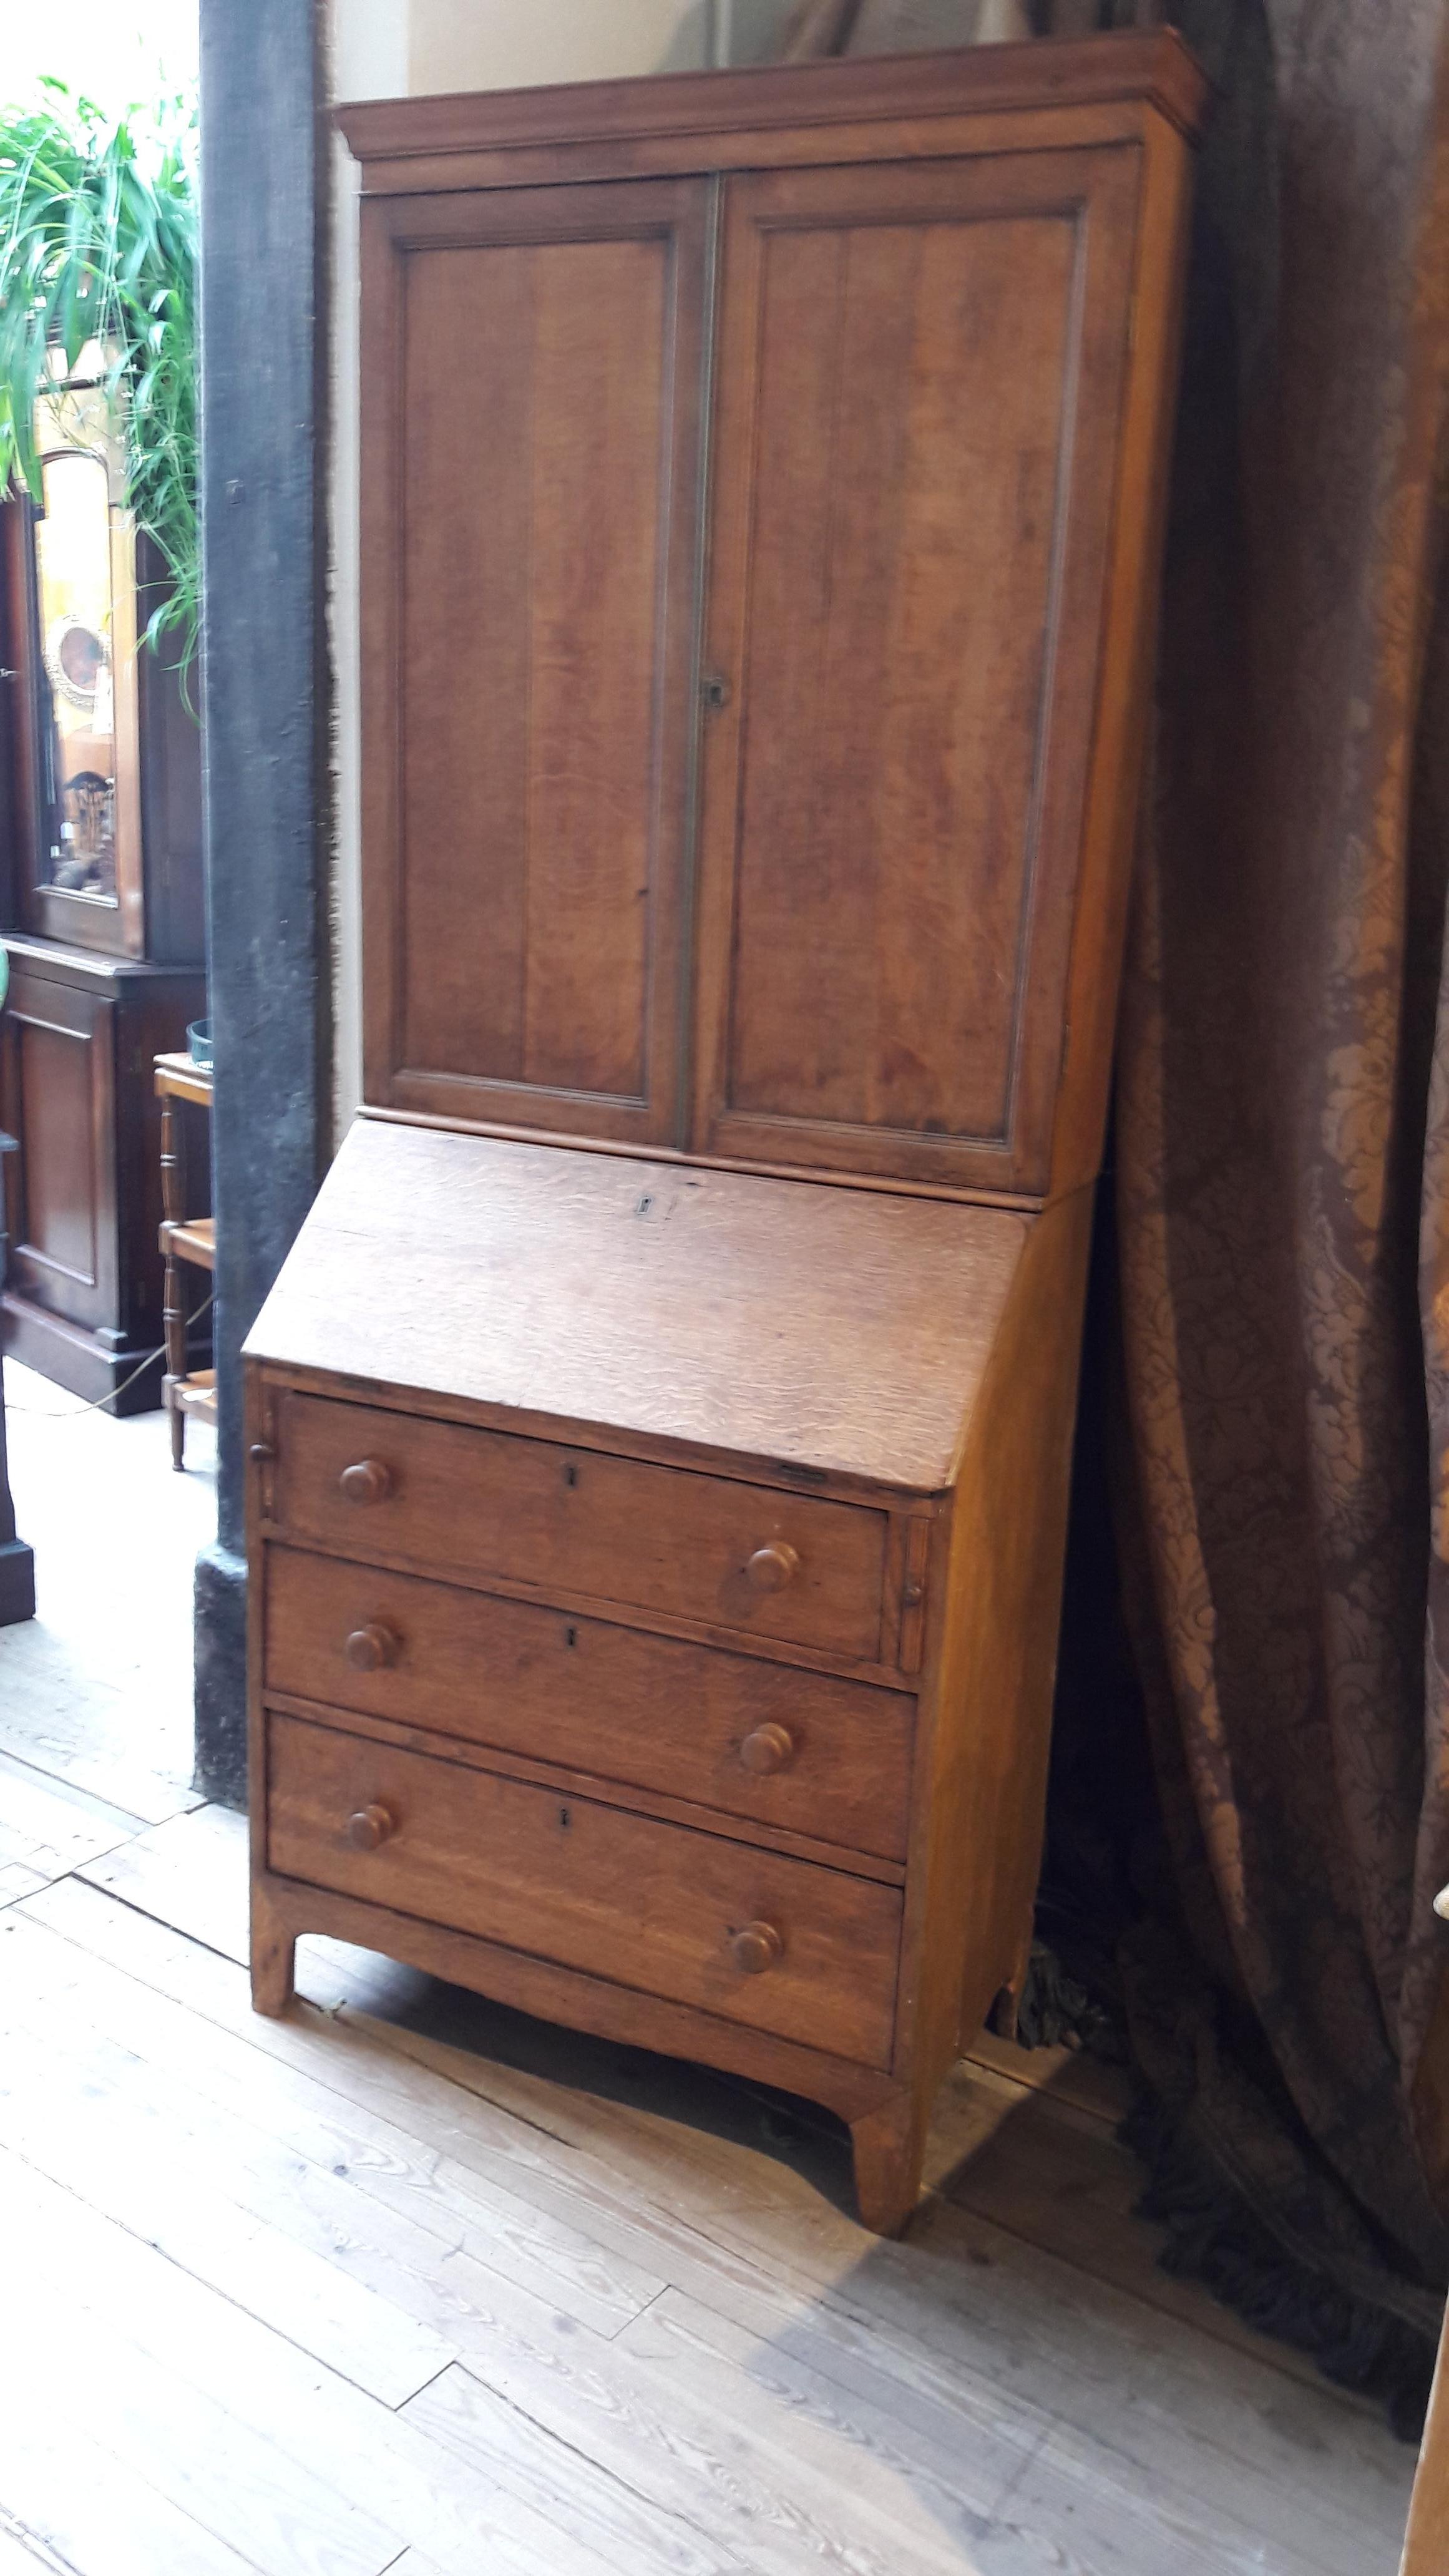 Decorative and slim secretaire (bureau) bookcase in light oak. The upper part is with wooden panel doors wich is quite rare. Inside the secretaire there is a nice tan leather and some small drawers.